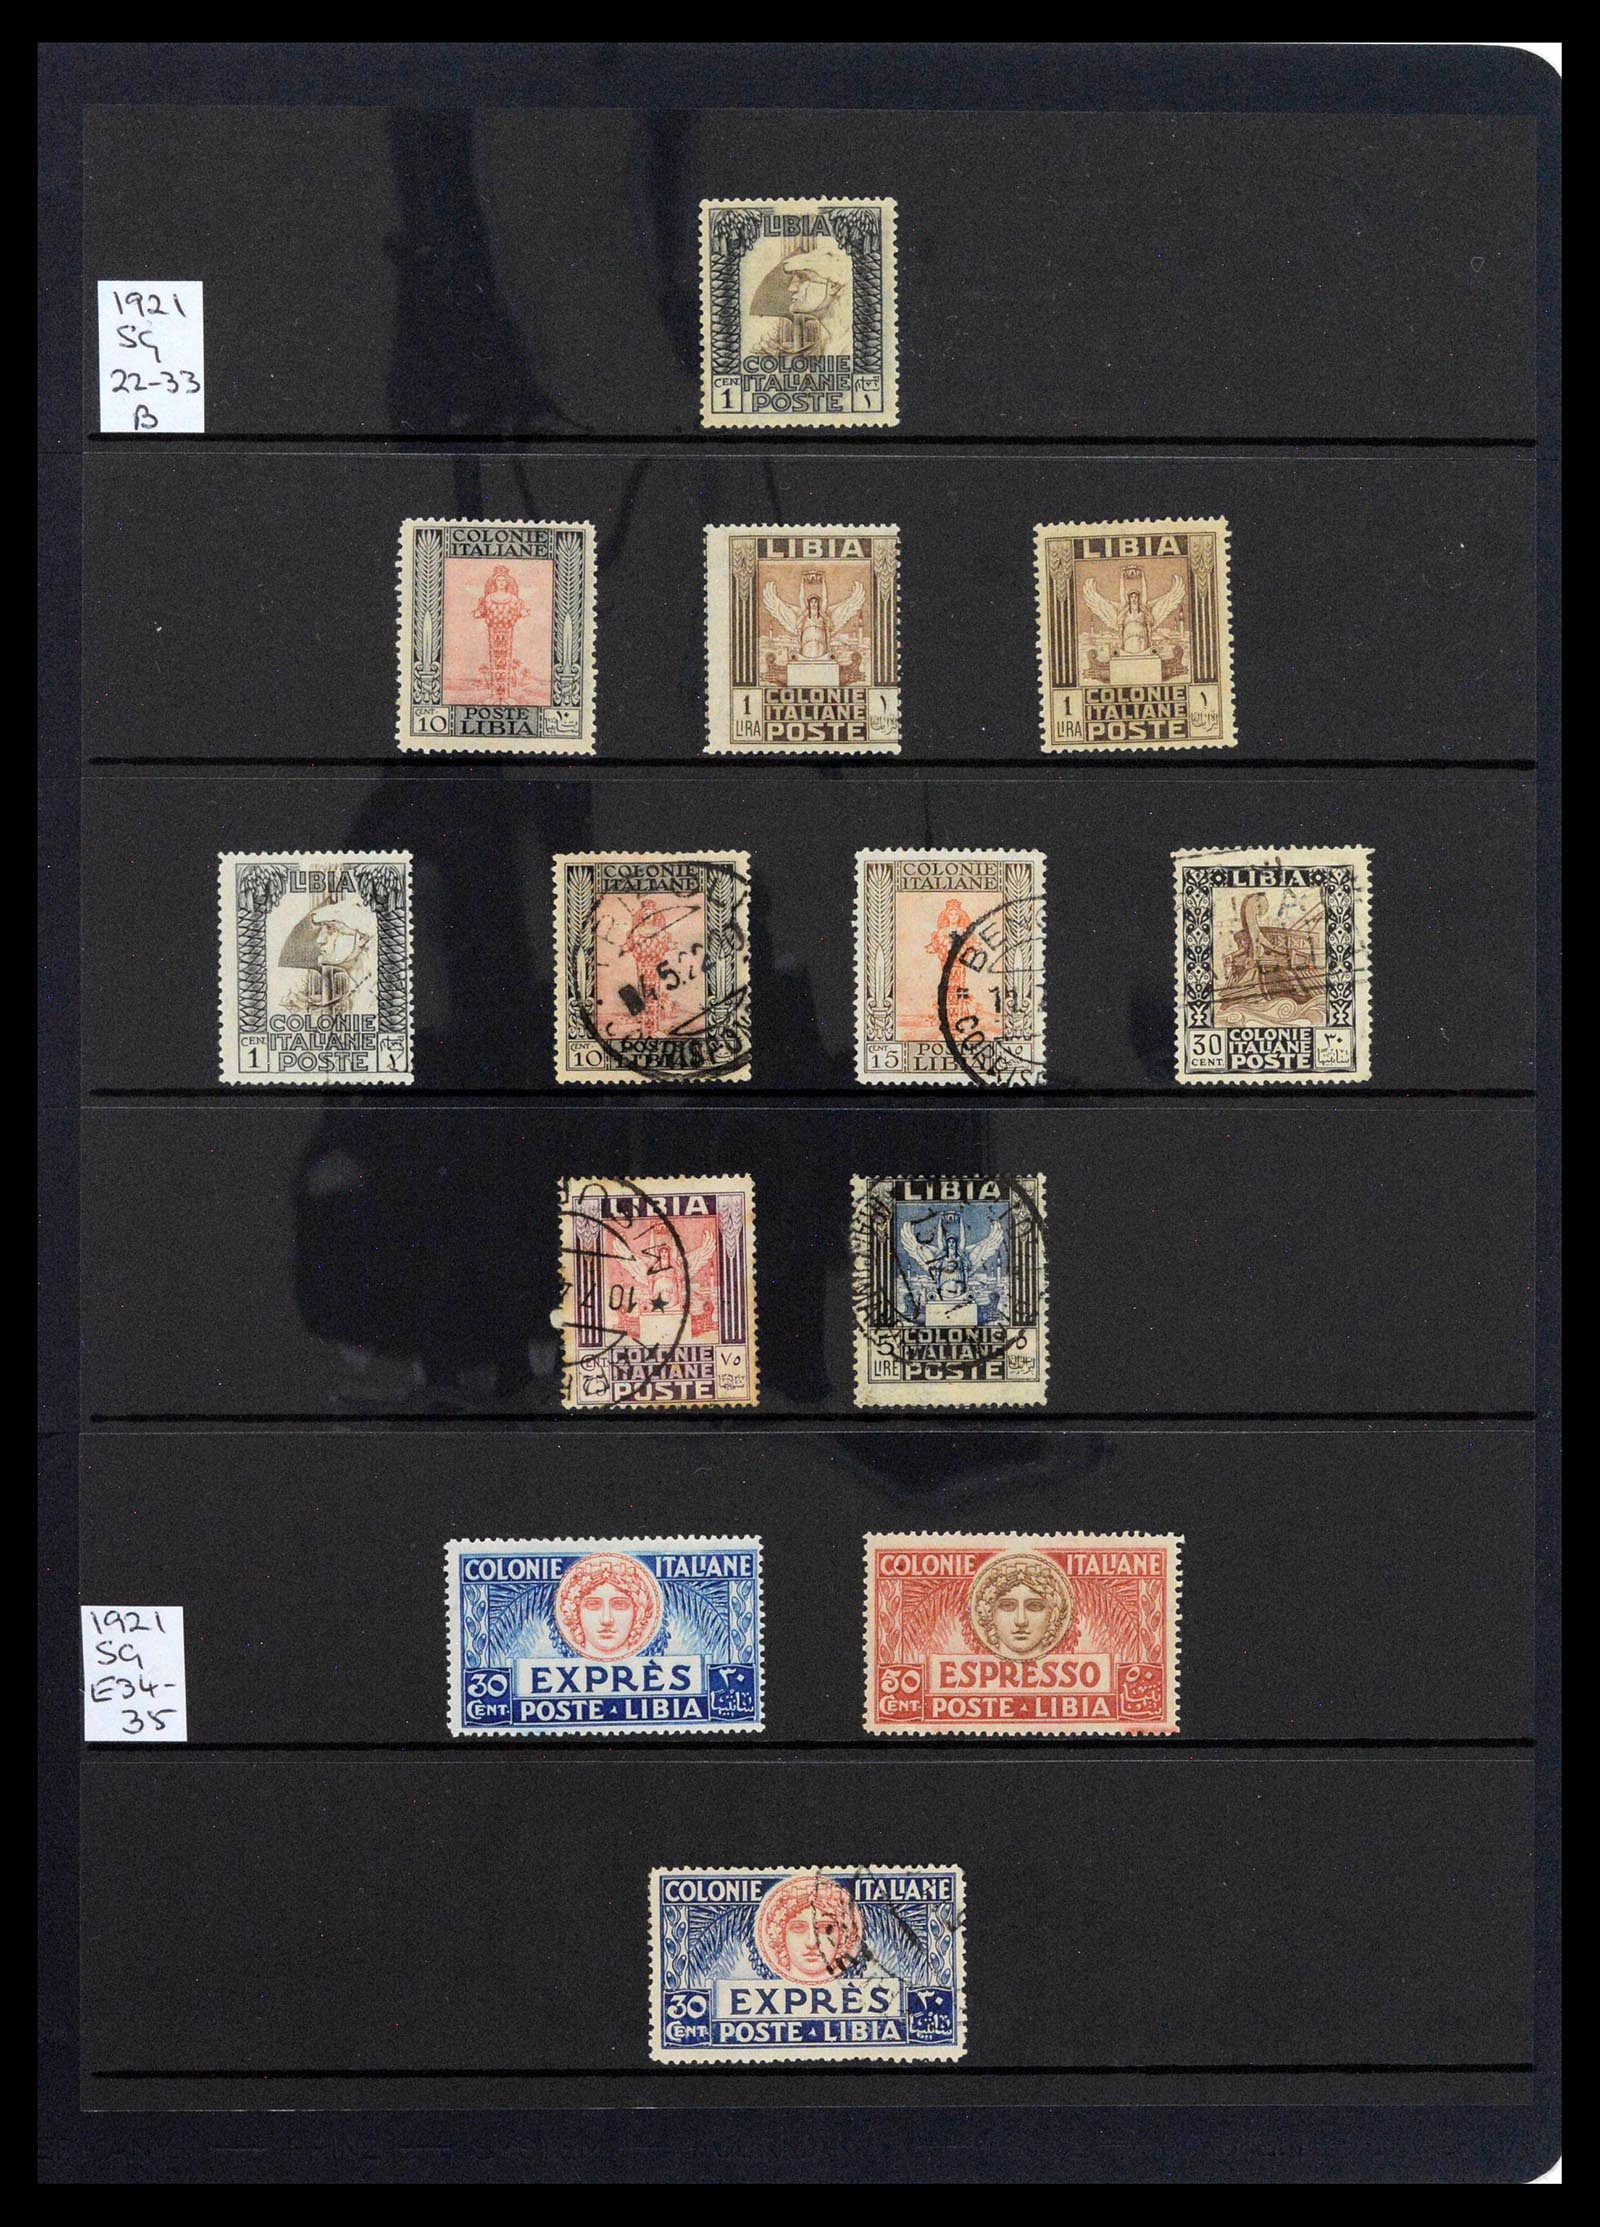 39140 0008 - Stamp collection 39140 Italian colonies 1874-1941.